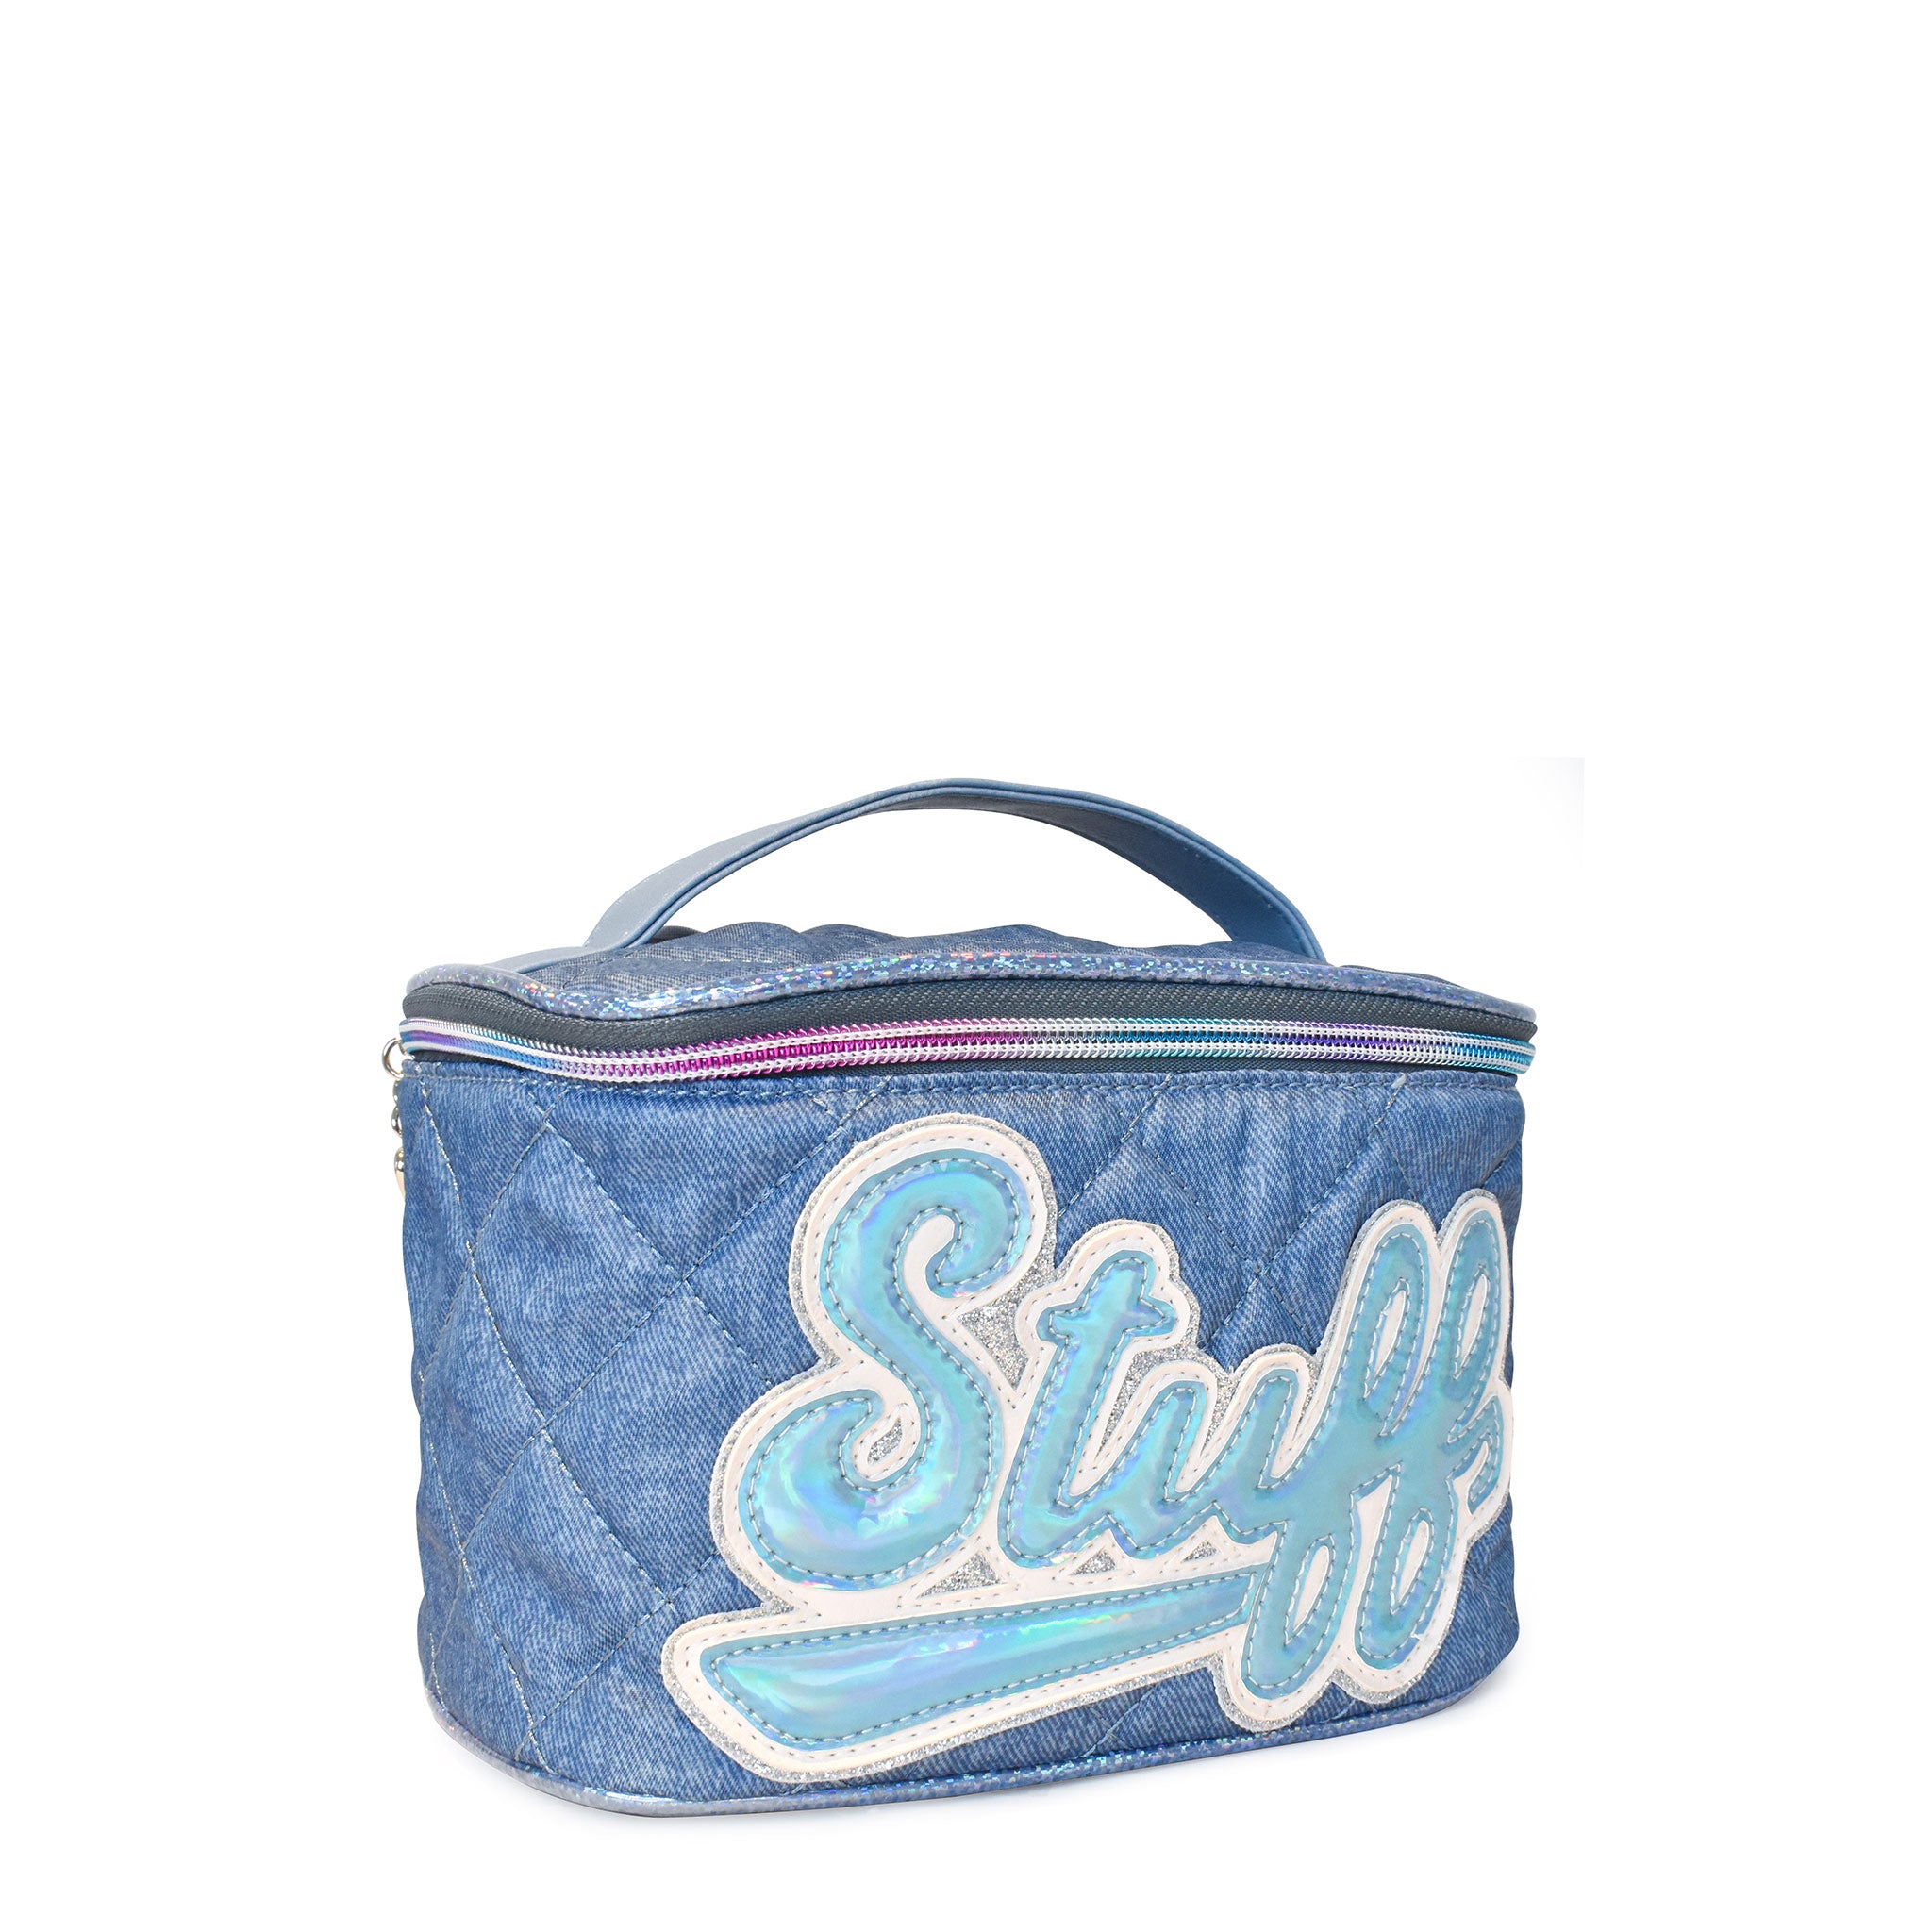 Side view of a denim printed & quilted train case with blue metallic retro-inspired script 'STUFF' applique